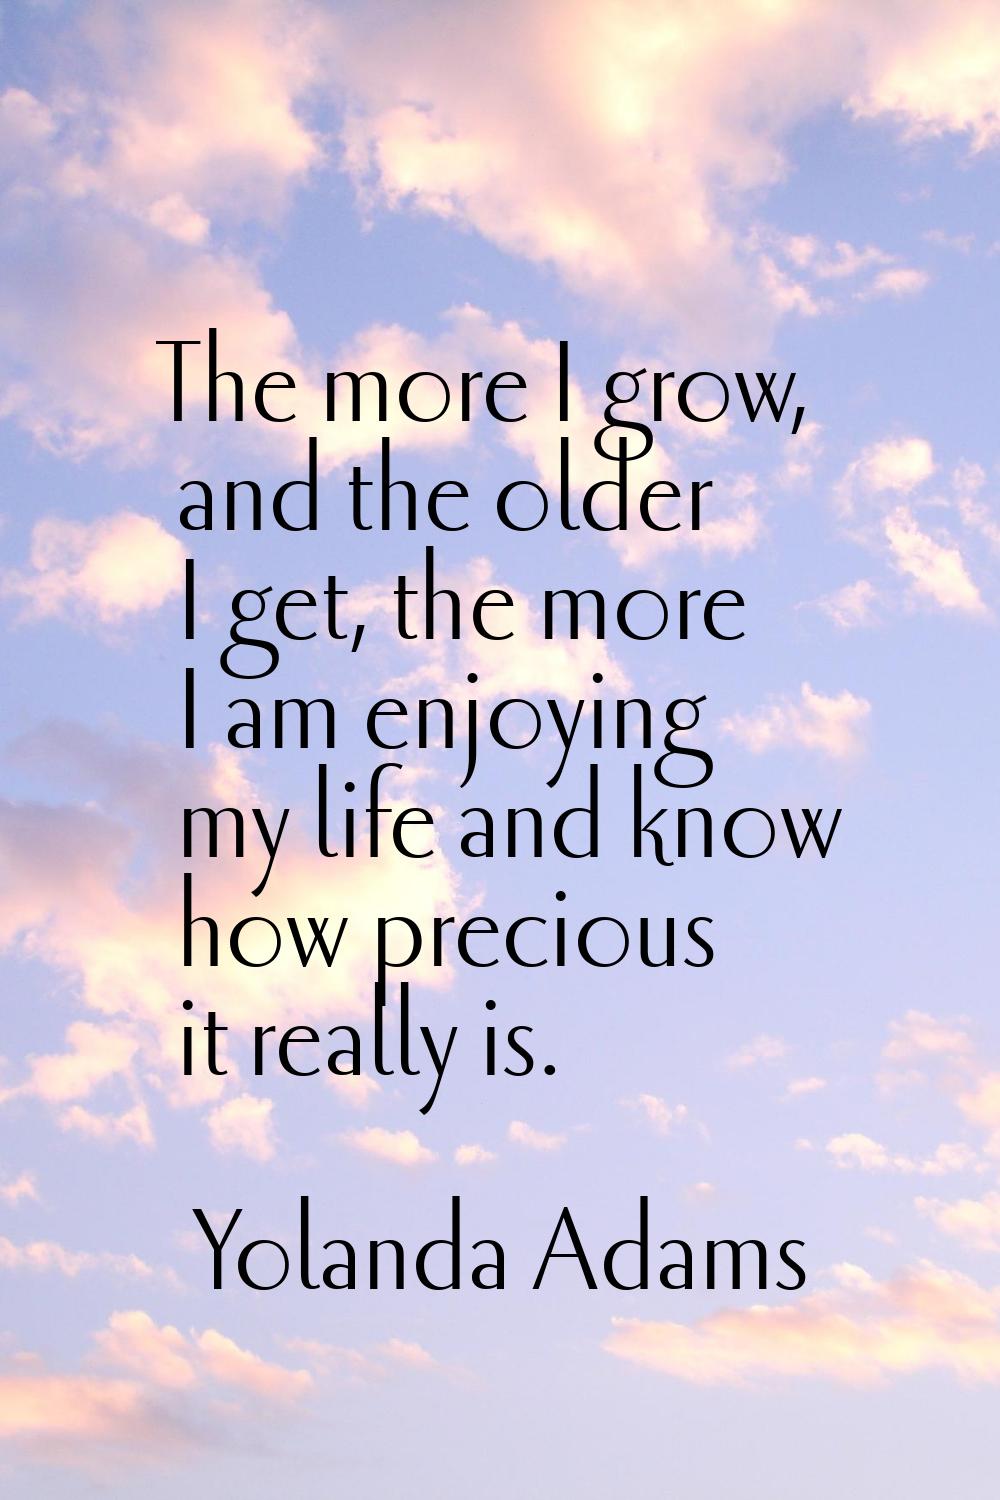 The more I grow, and the older I get, the more I am enjoying my life and know how precious it reall